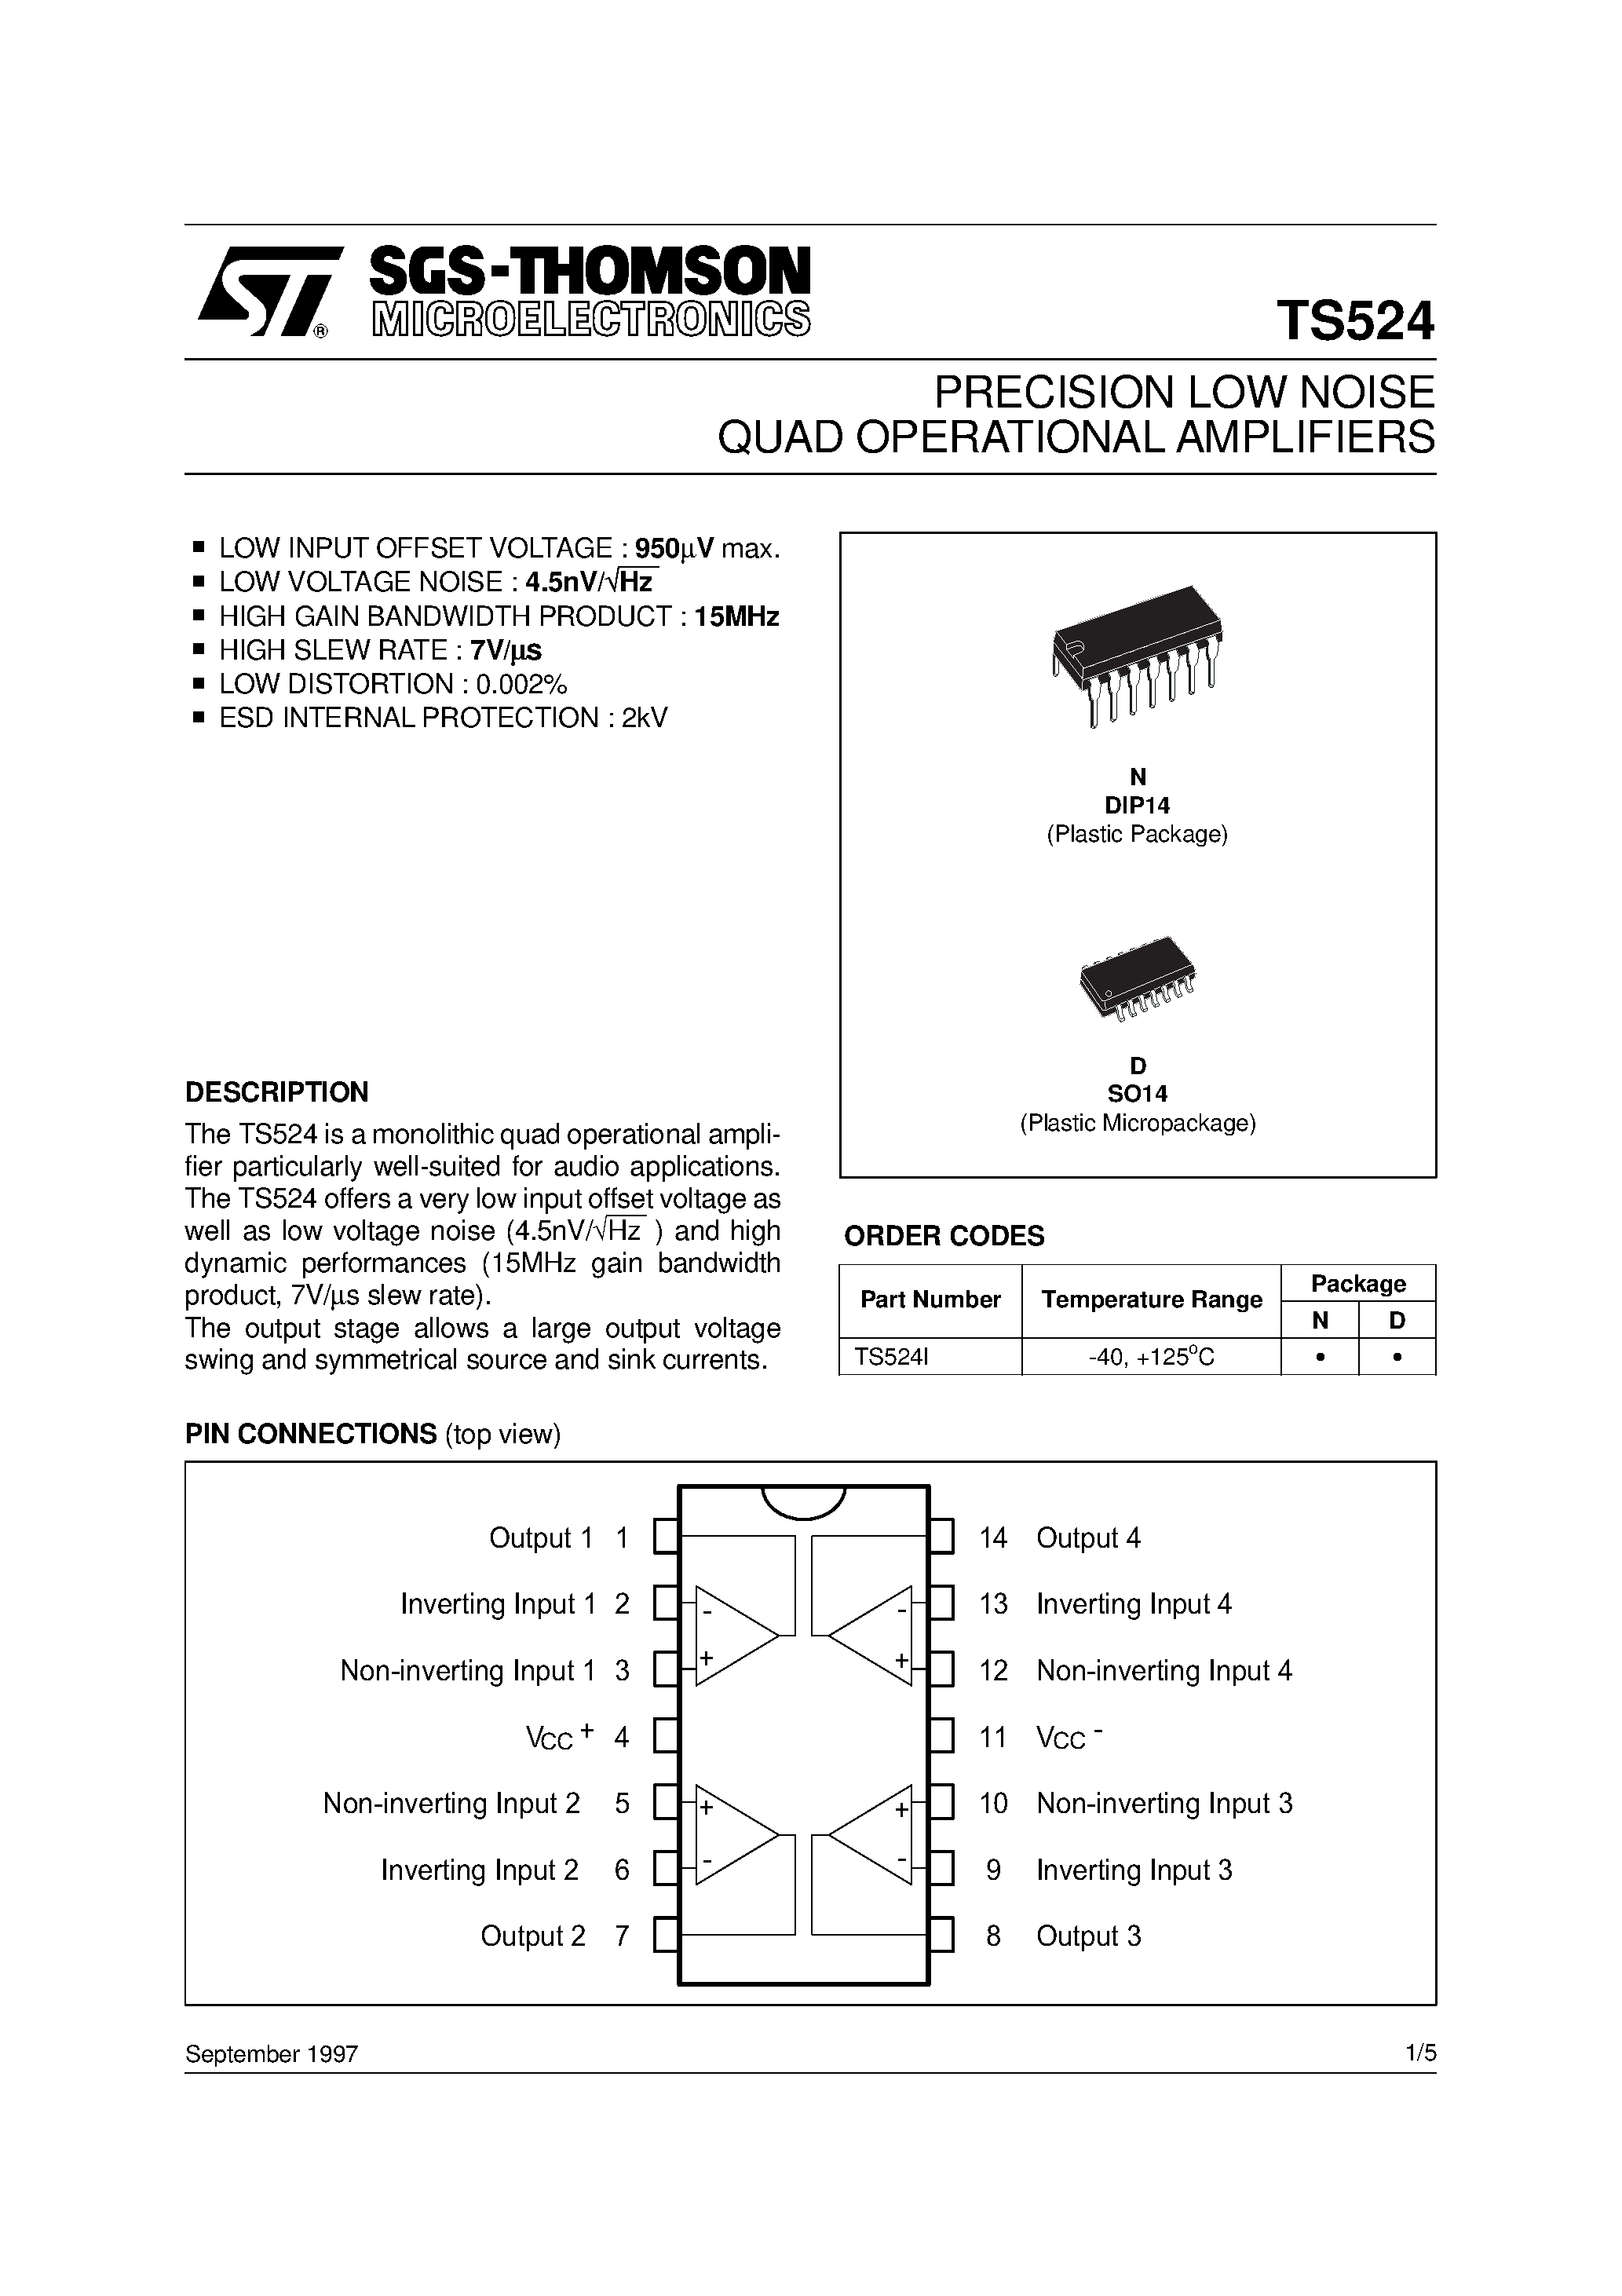 Datasheet TS524ID - PRECISION LOW NOISE QUAD OPERATIONAL AMPLIFIERS page 1